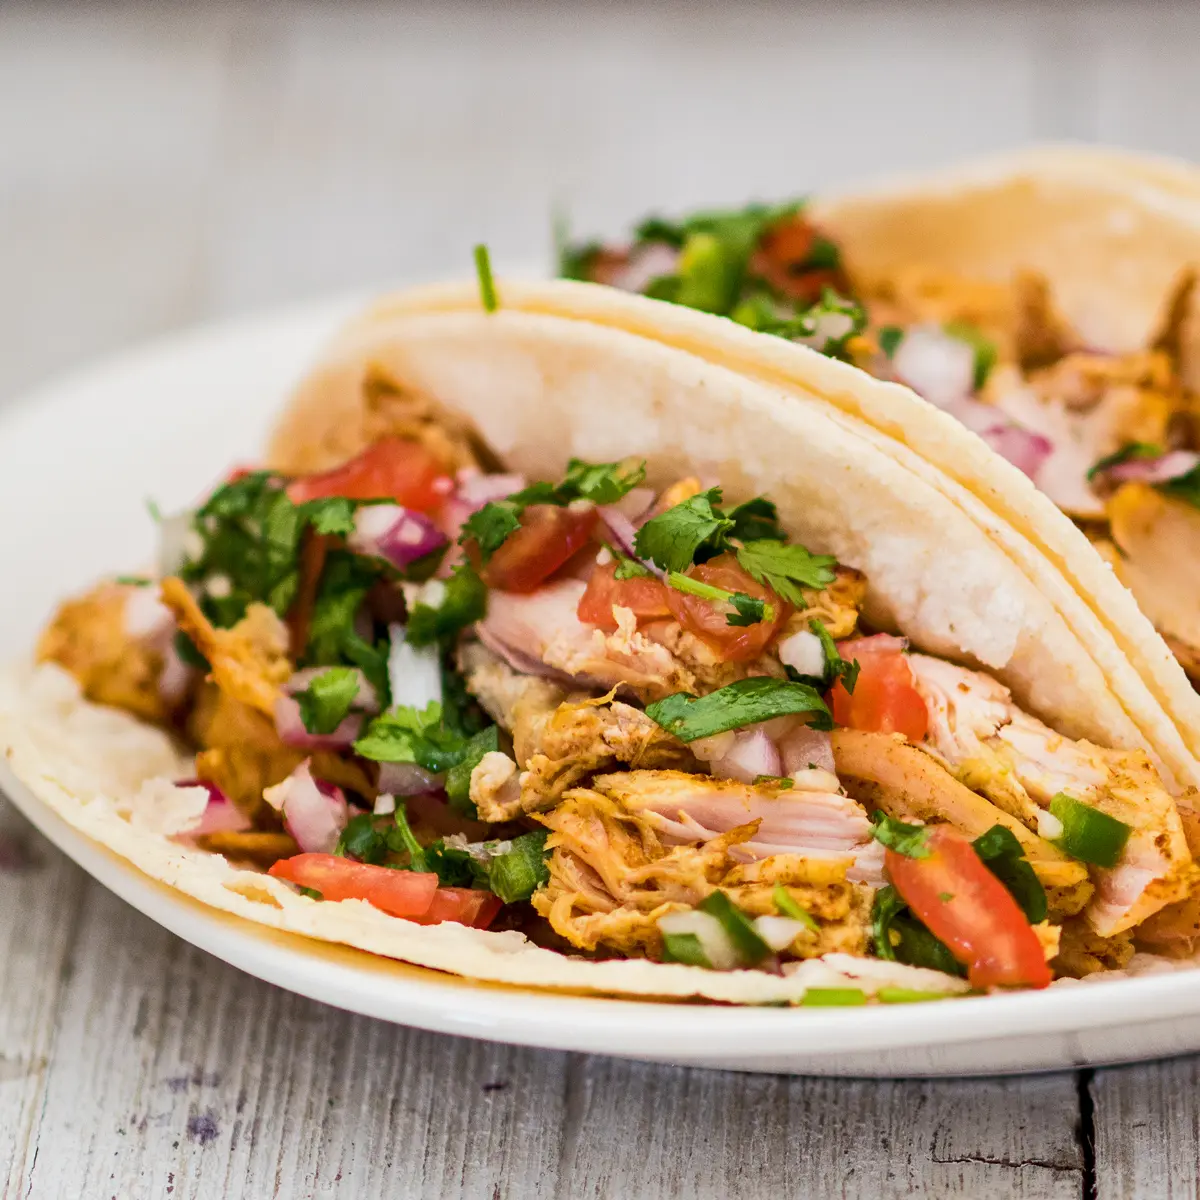 square image showing a close up view of the turkey carnitas garnished and served with fresh homemade pico de gallo served on white corn tortillas on a white plate with light wood grain background